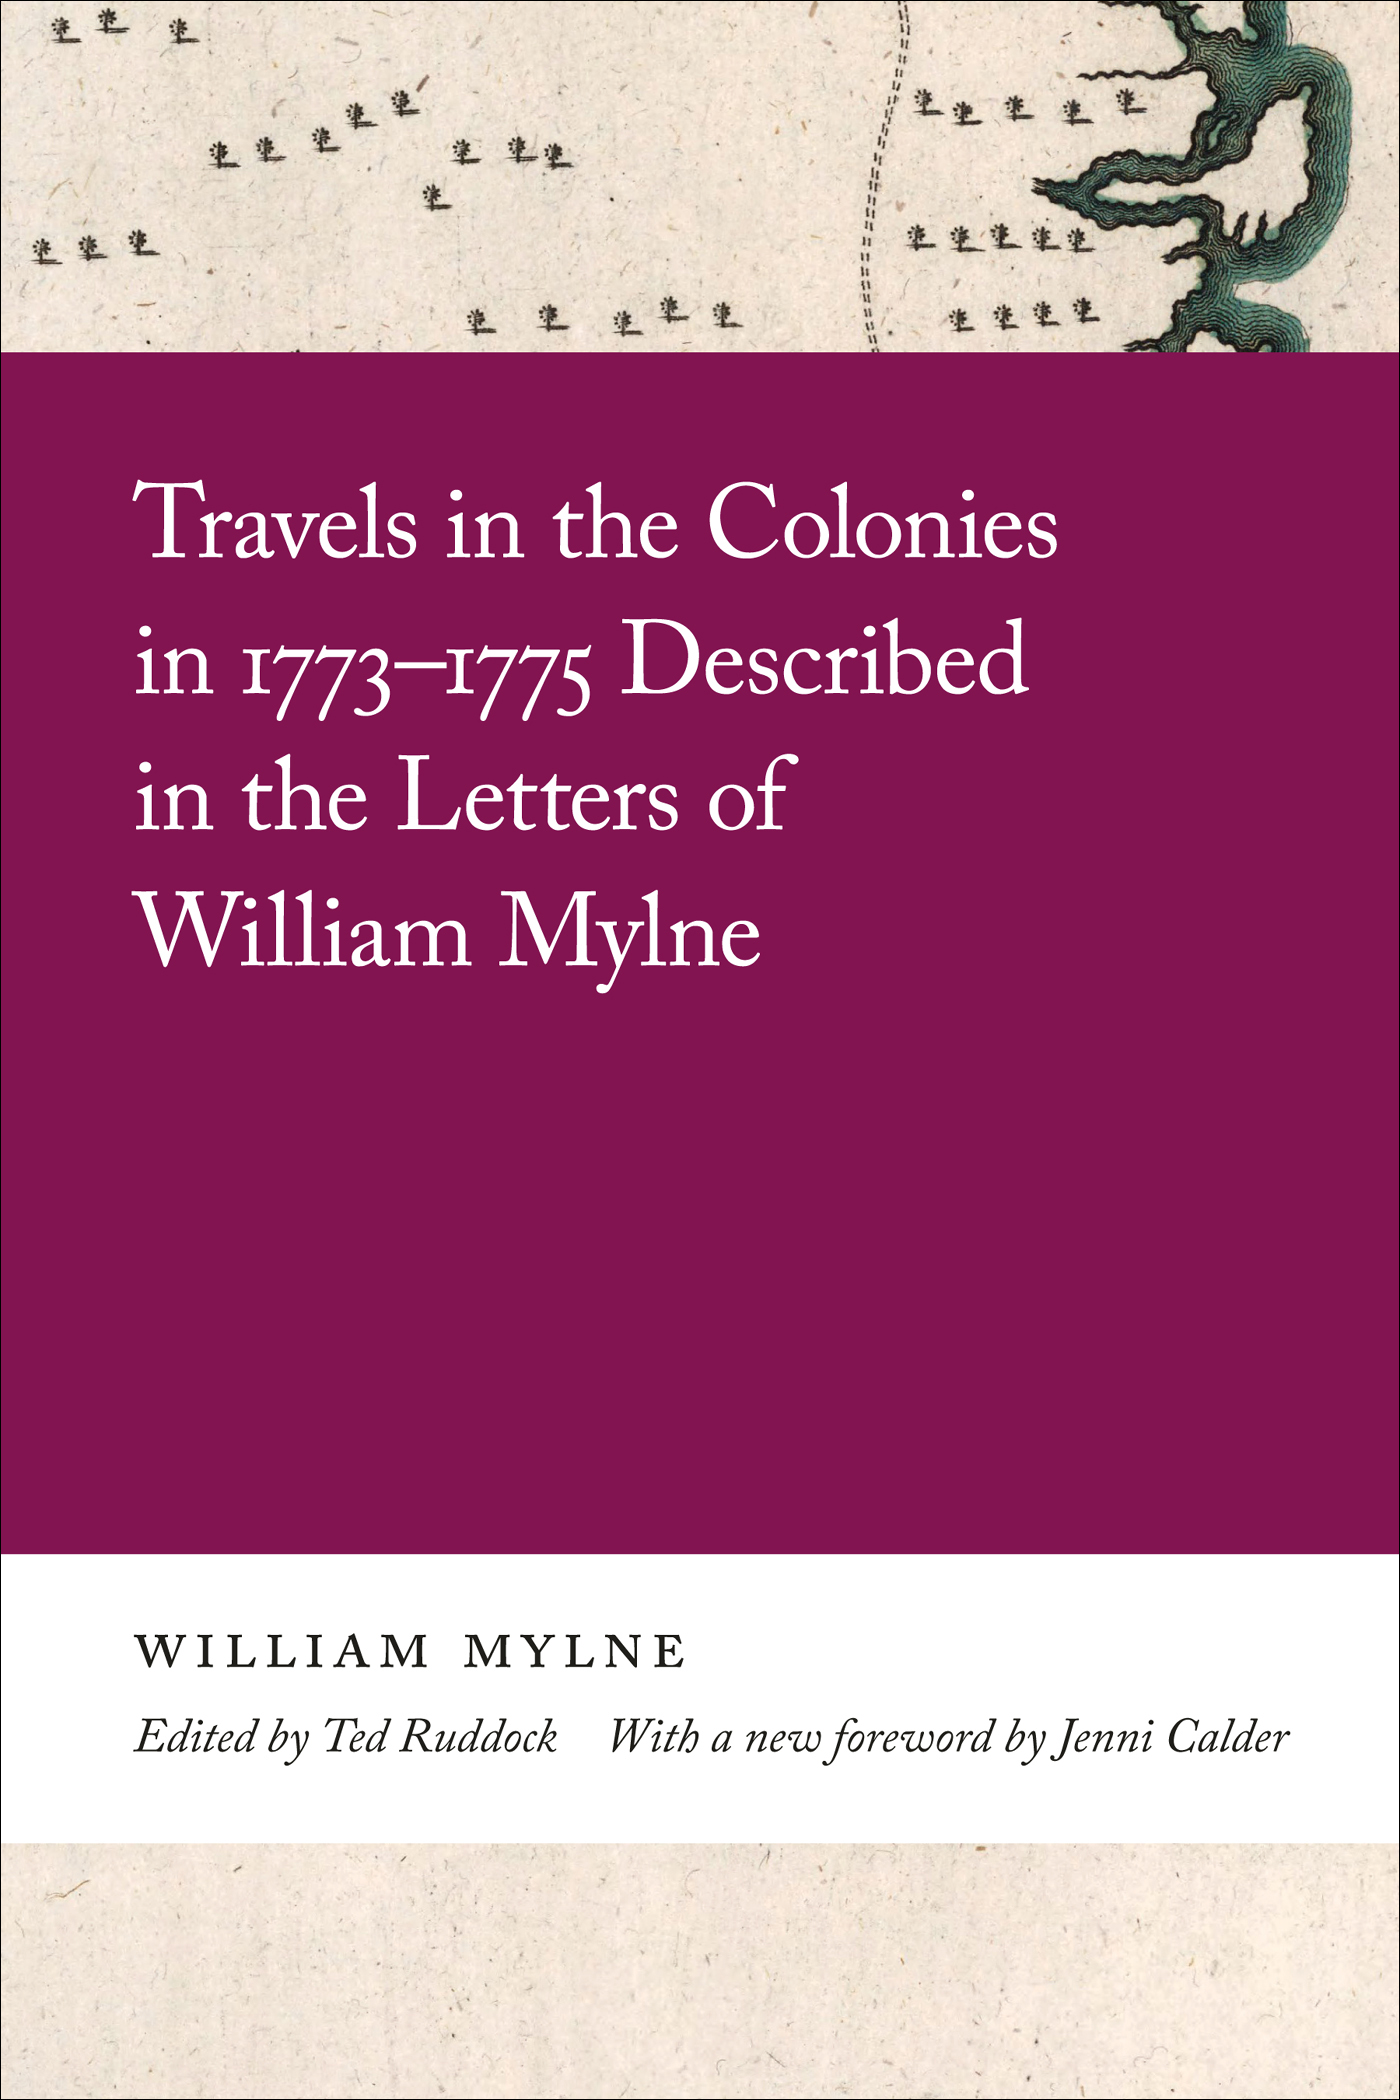 Cover page of “Travels in the Colonies in 1773–1775 Described in the Letters of William Mylne.”